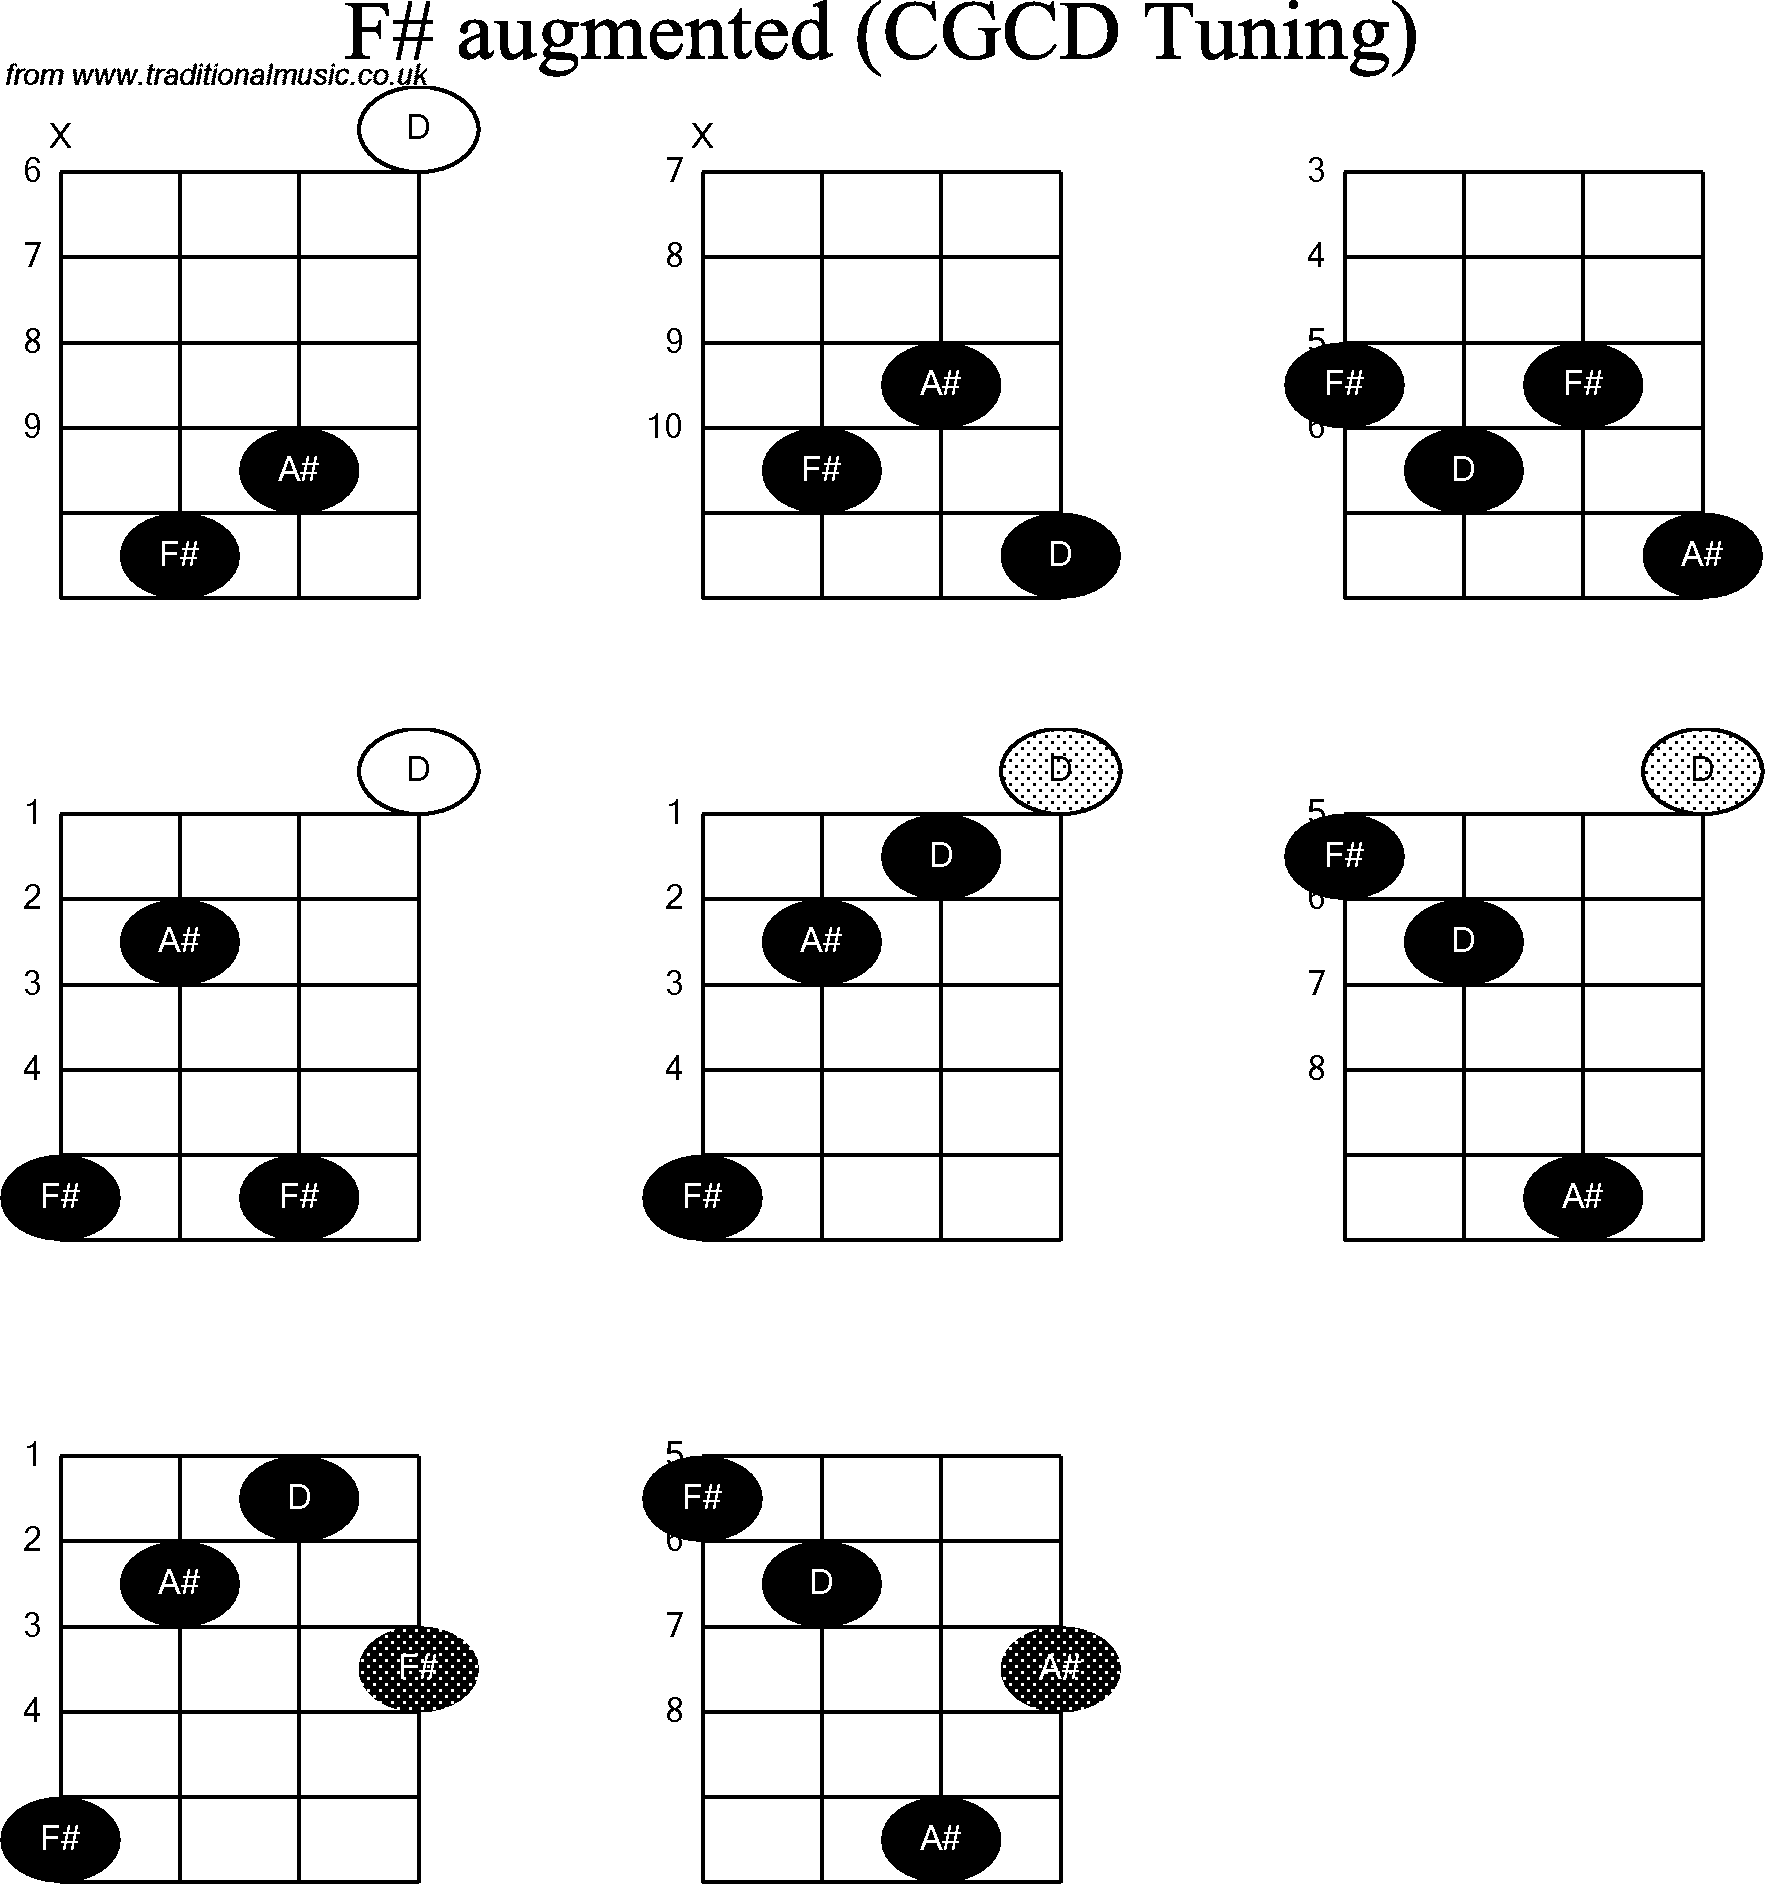 Chord diagrams for Banjo(Double C) F# Augmented